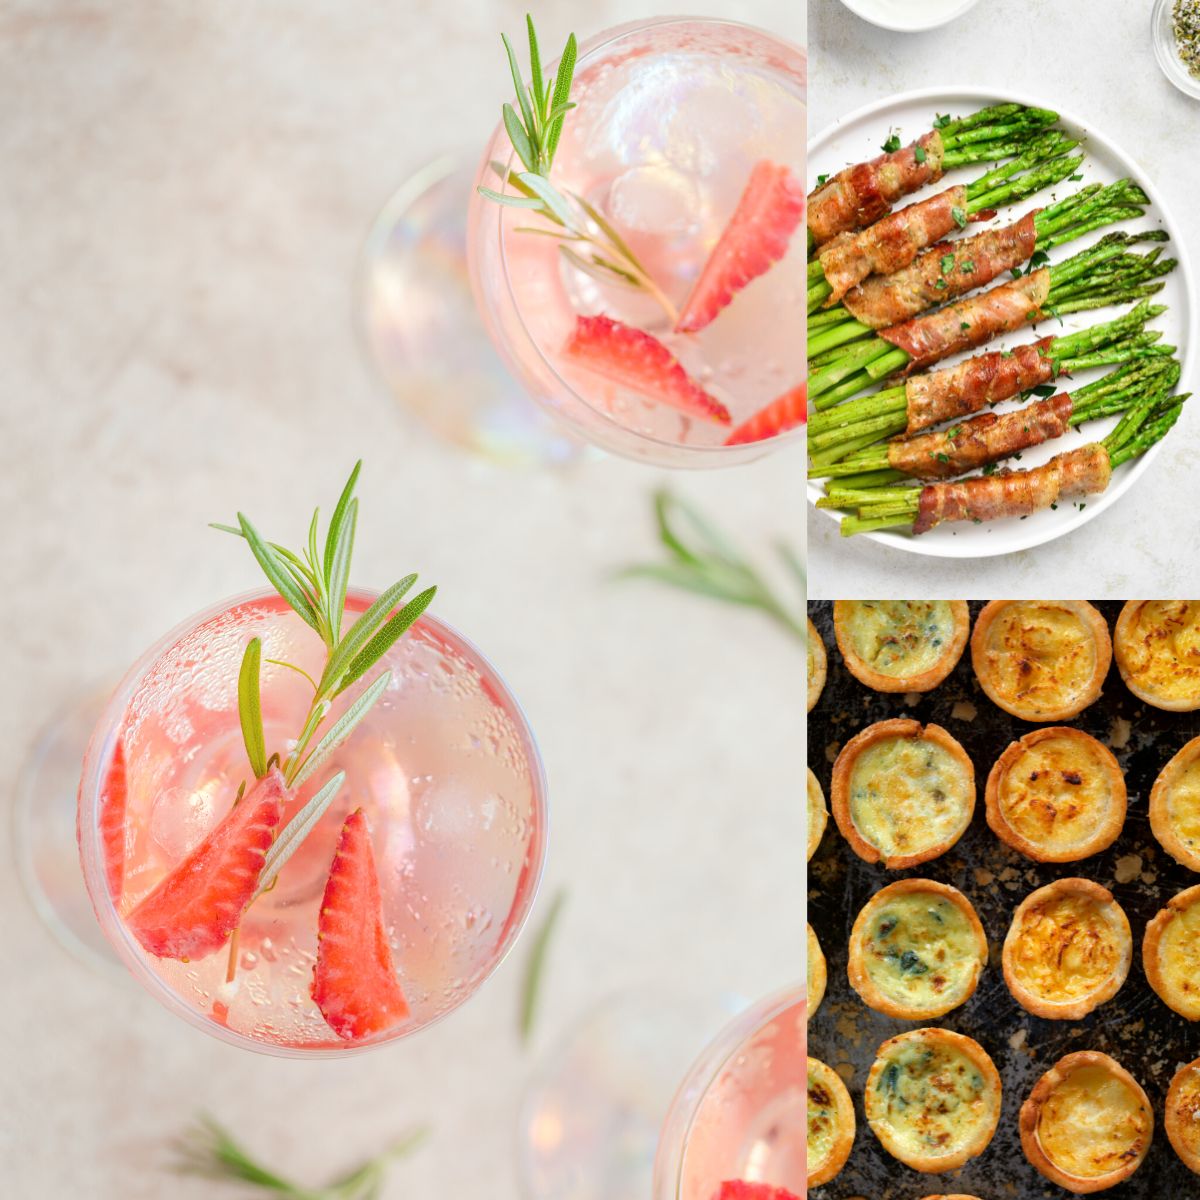 A strawberry mocktail next to bacon wrapped asparagus and mini quiche appetizers.